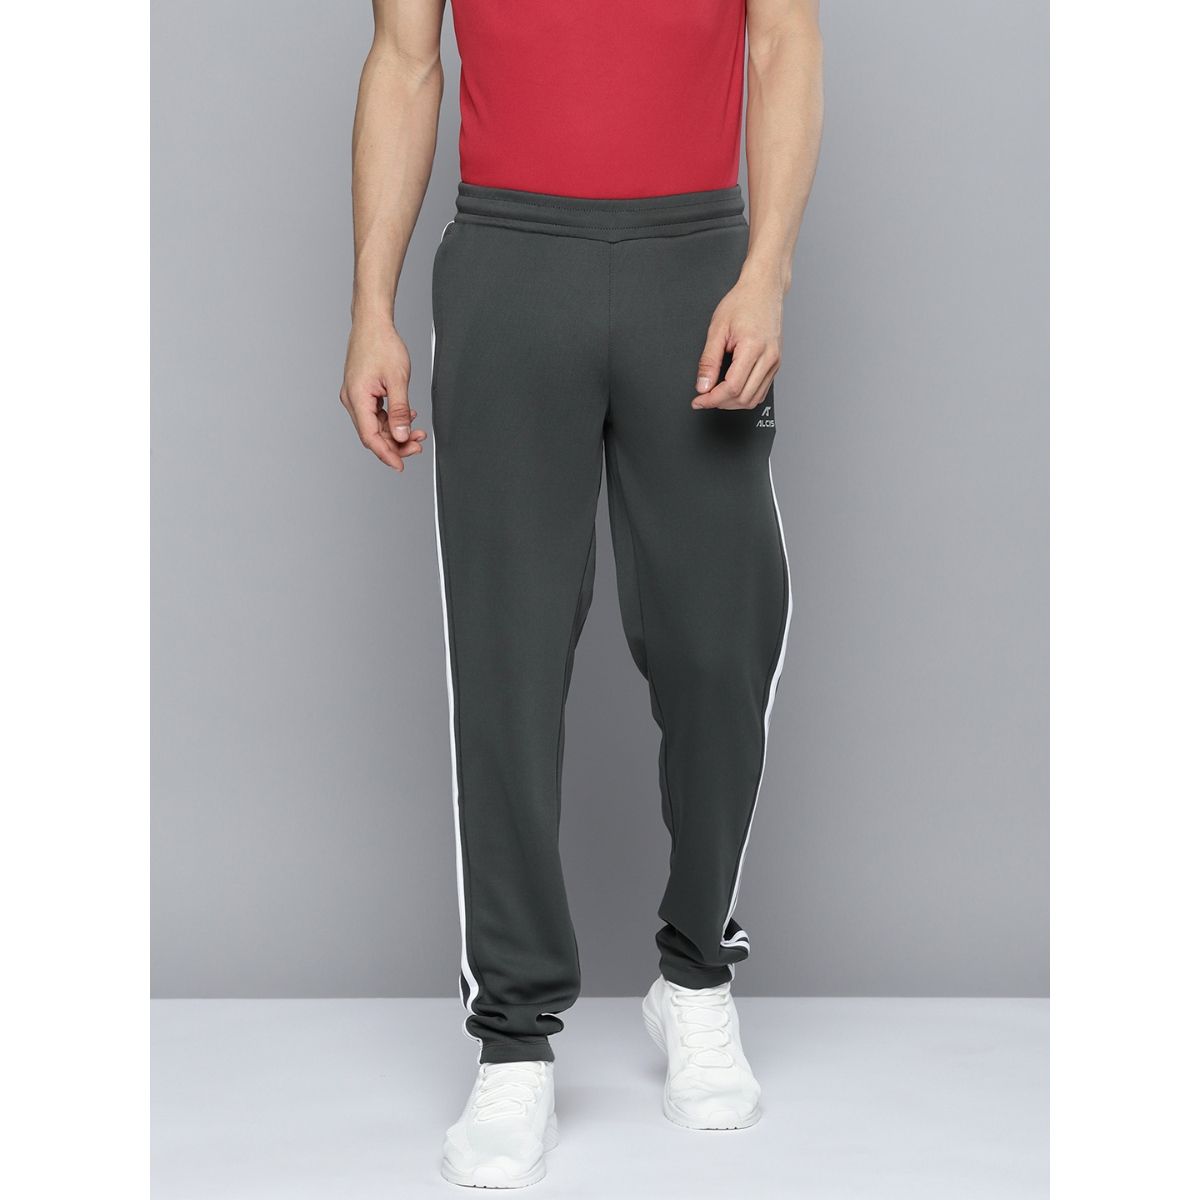 Solid Men Grey Blue Track Pants Price in India  Buy Solid Men Grey Blue Track  Pants online at Shopsyin